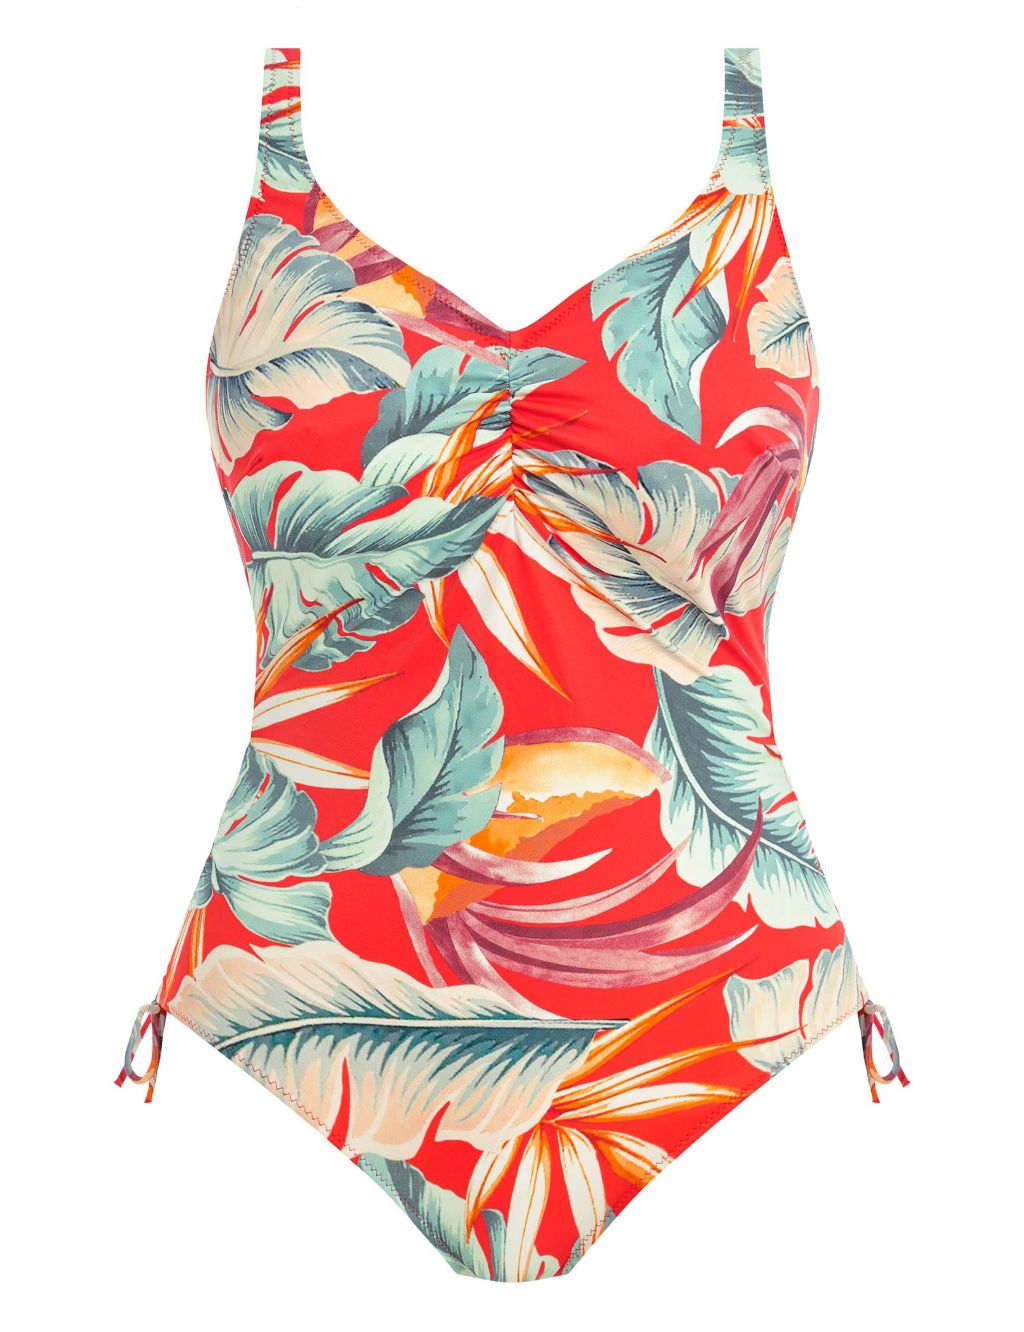 Bamboo Grove Wired V-Neck Swimsuit image 2